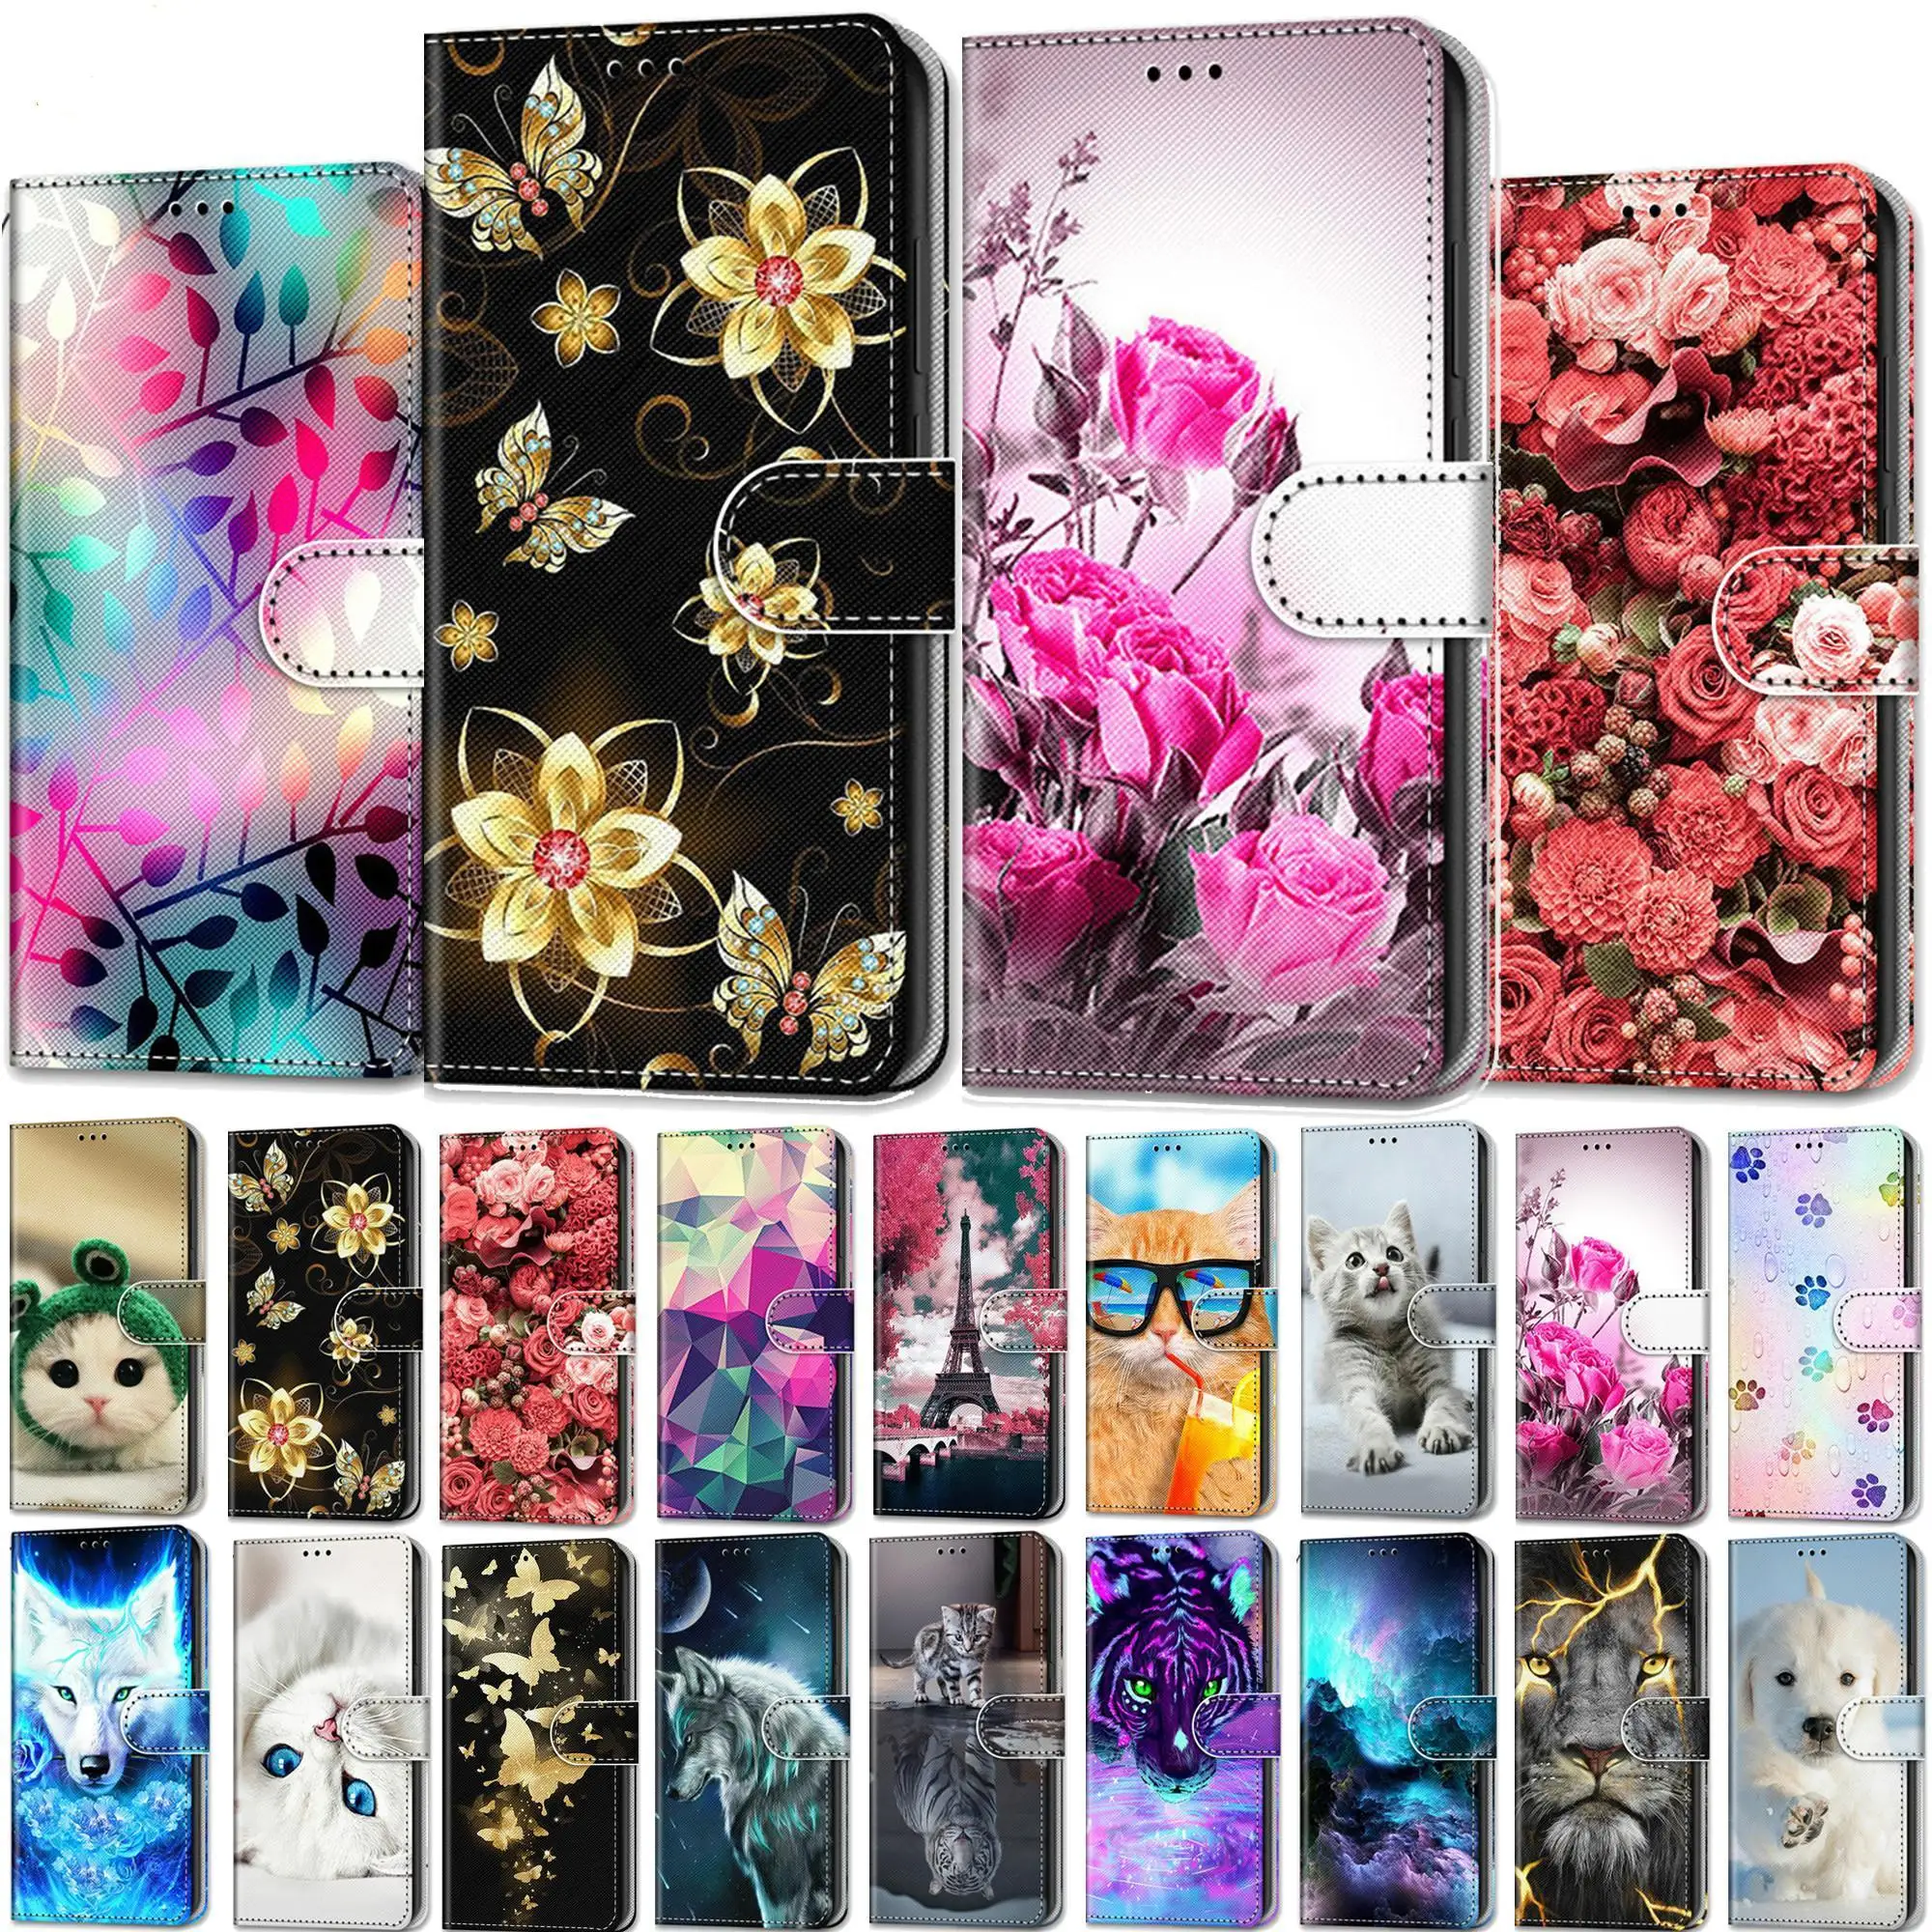 

Luxury Leather Case For Samsung Galaxy A20 10S Cover for Samsung S20 Ultra Plus A20E A30S A50S A51 01 21 Cases Magnet Card Slots